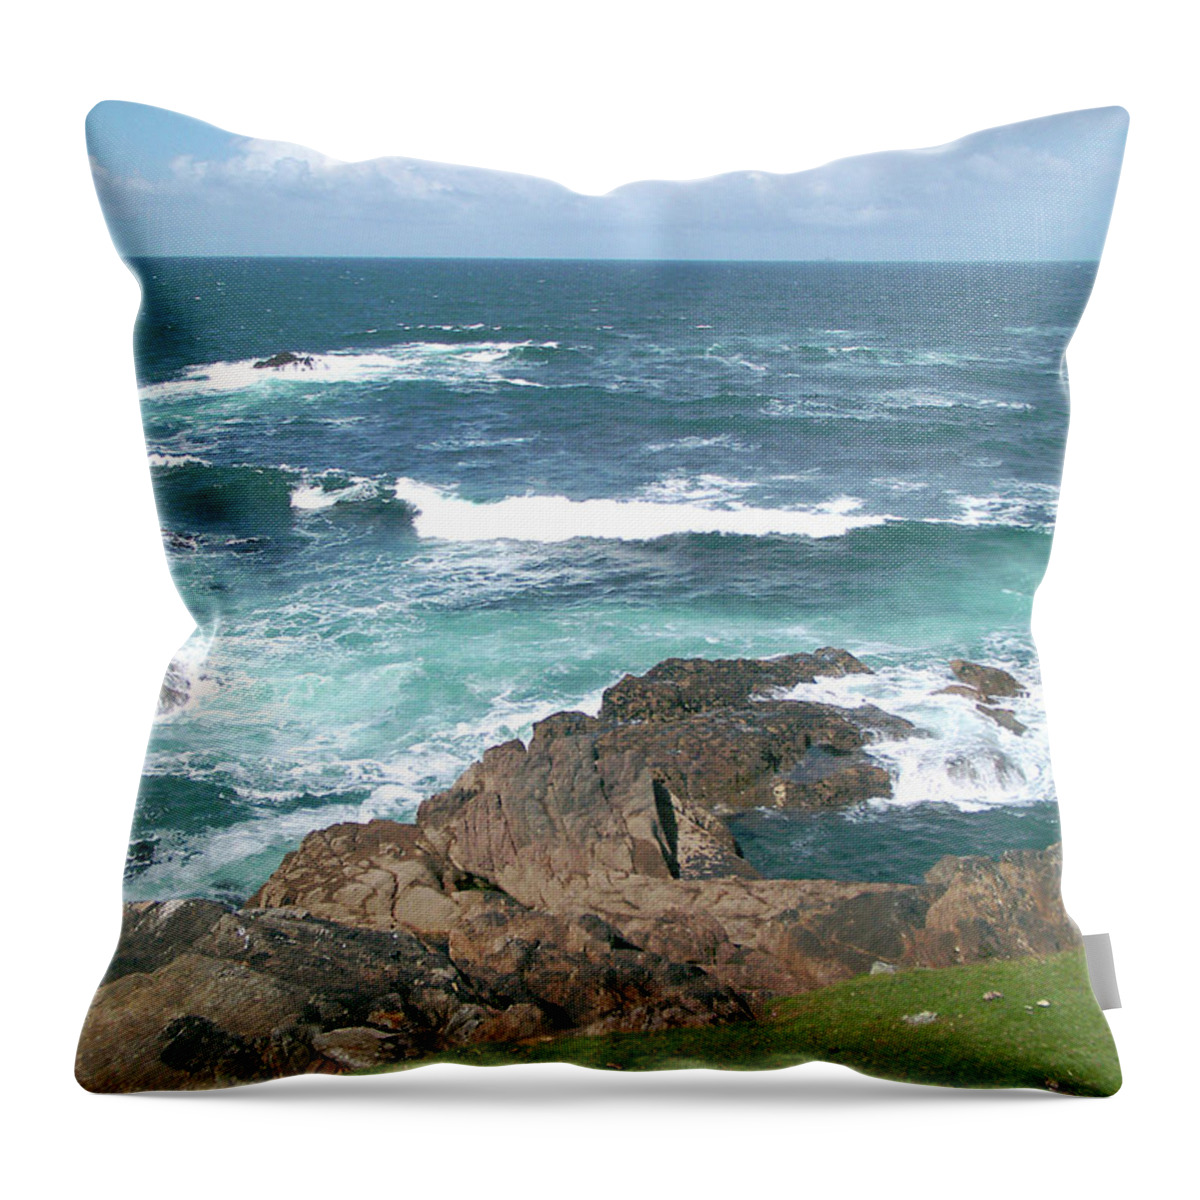 Scenics Throw Pillow featuring the photograph Atlantic Ocean by Photography By Robert Riddell